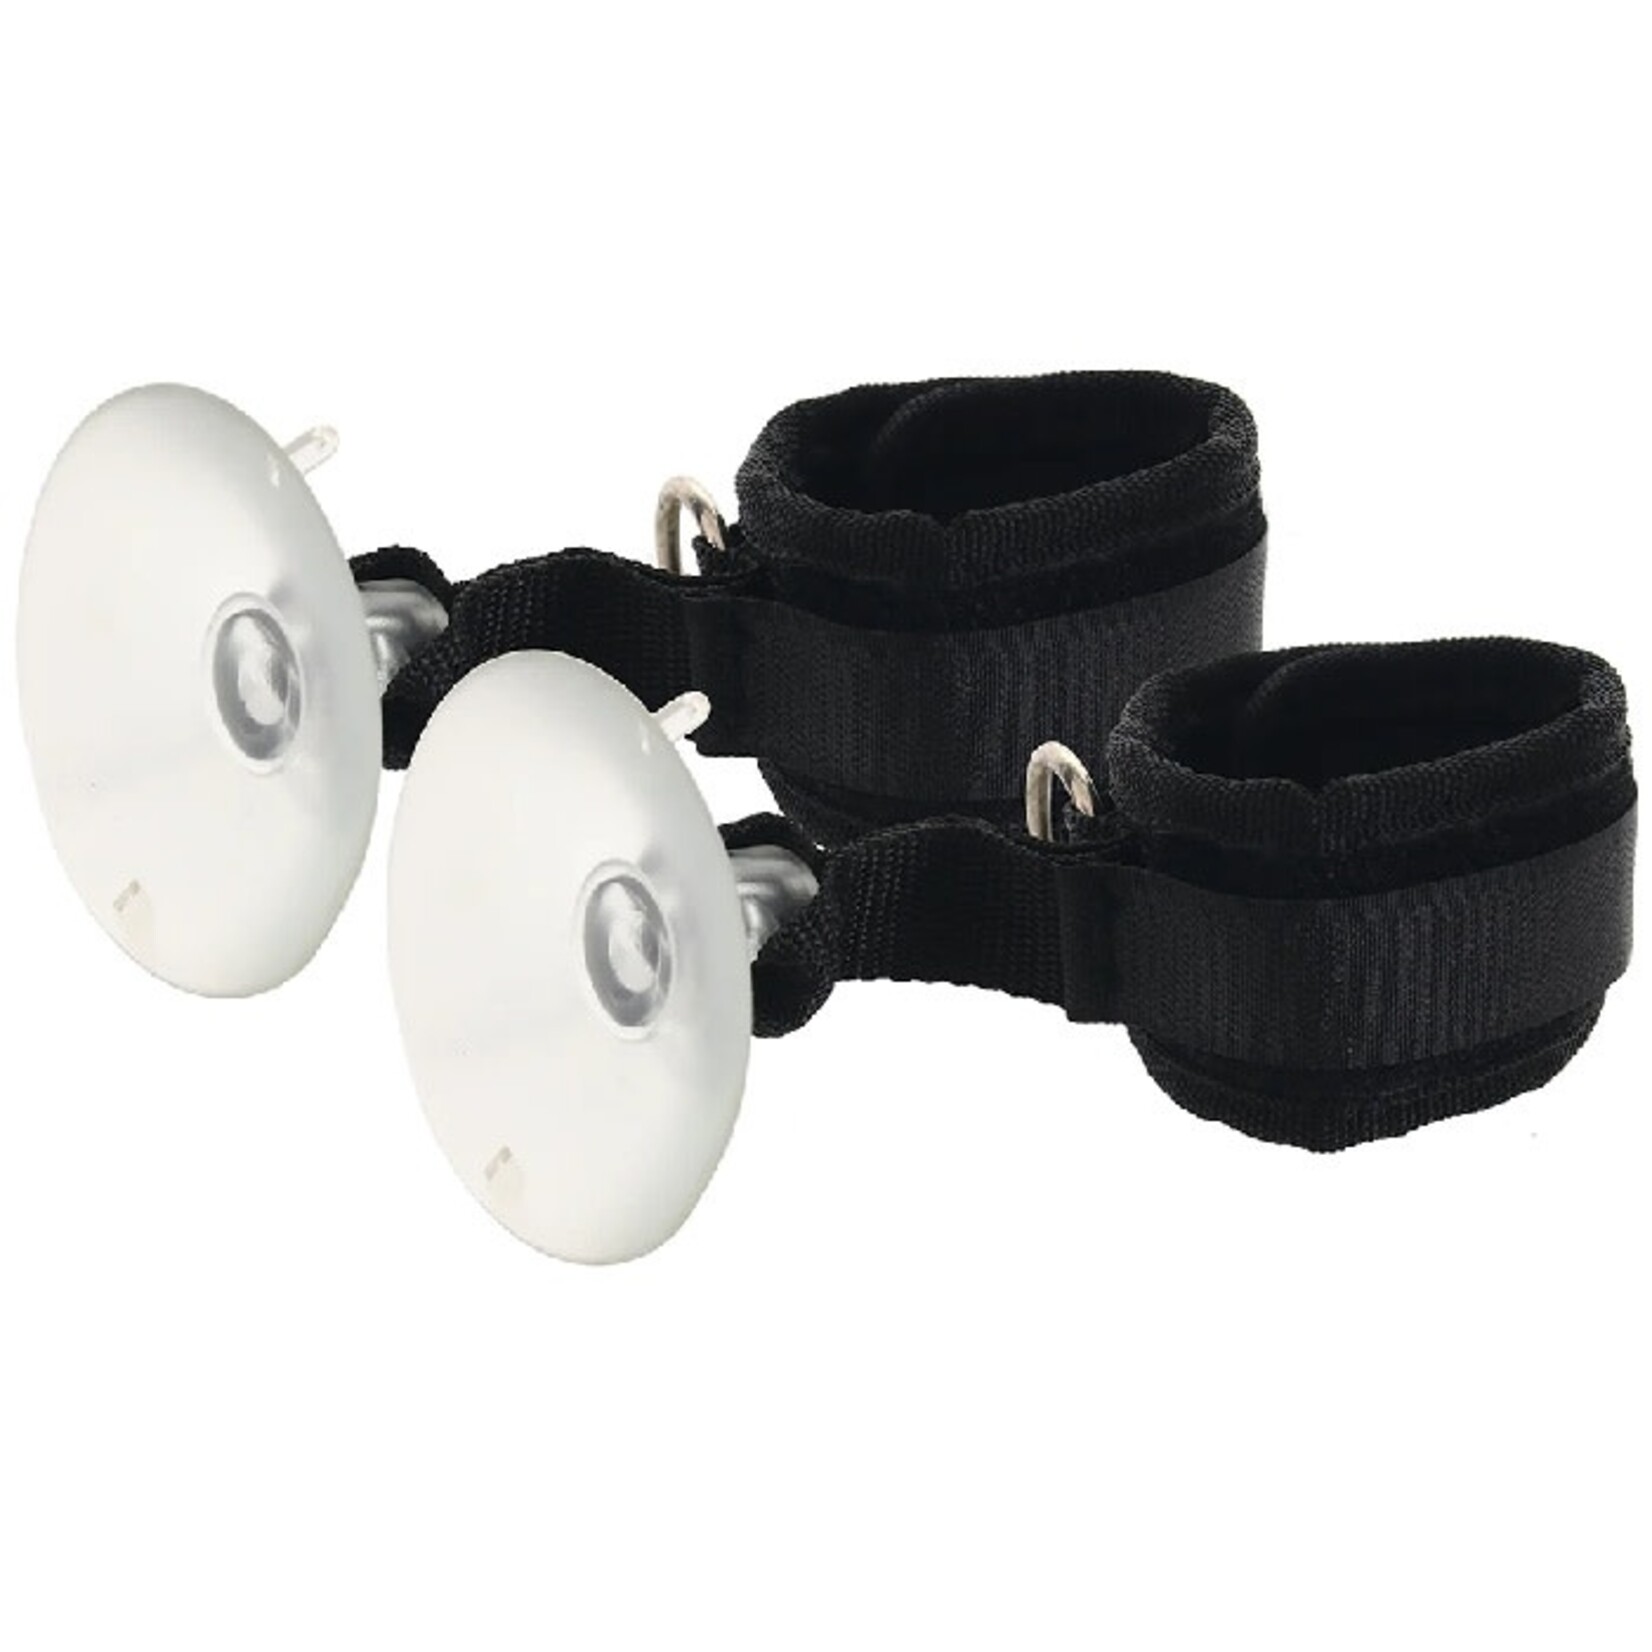 LUX FETISH LUX FETISH SEXY SUCTION CUFFS